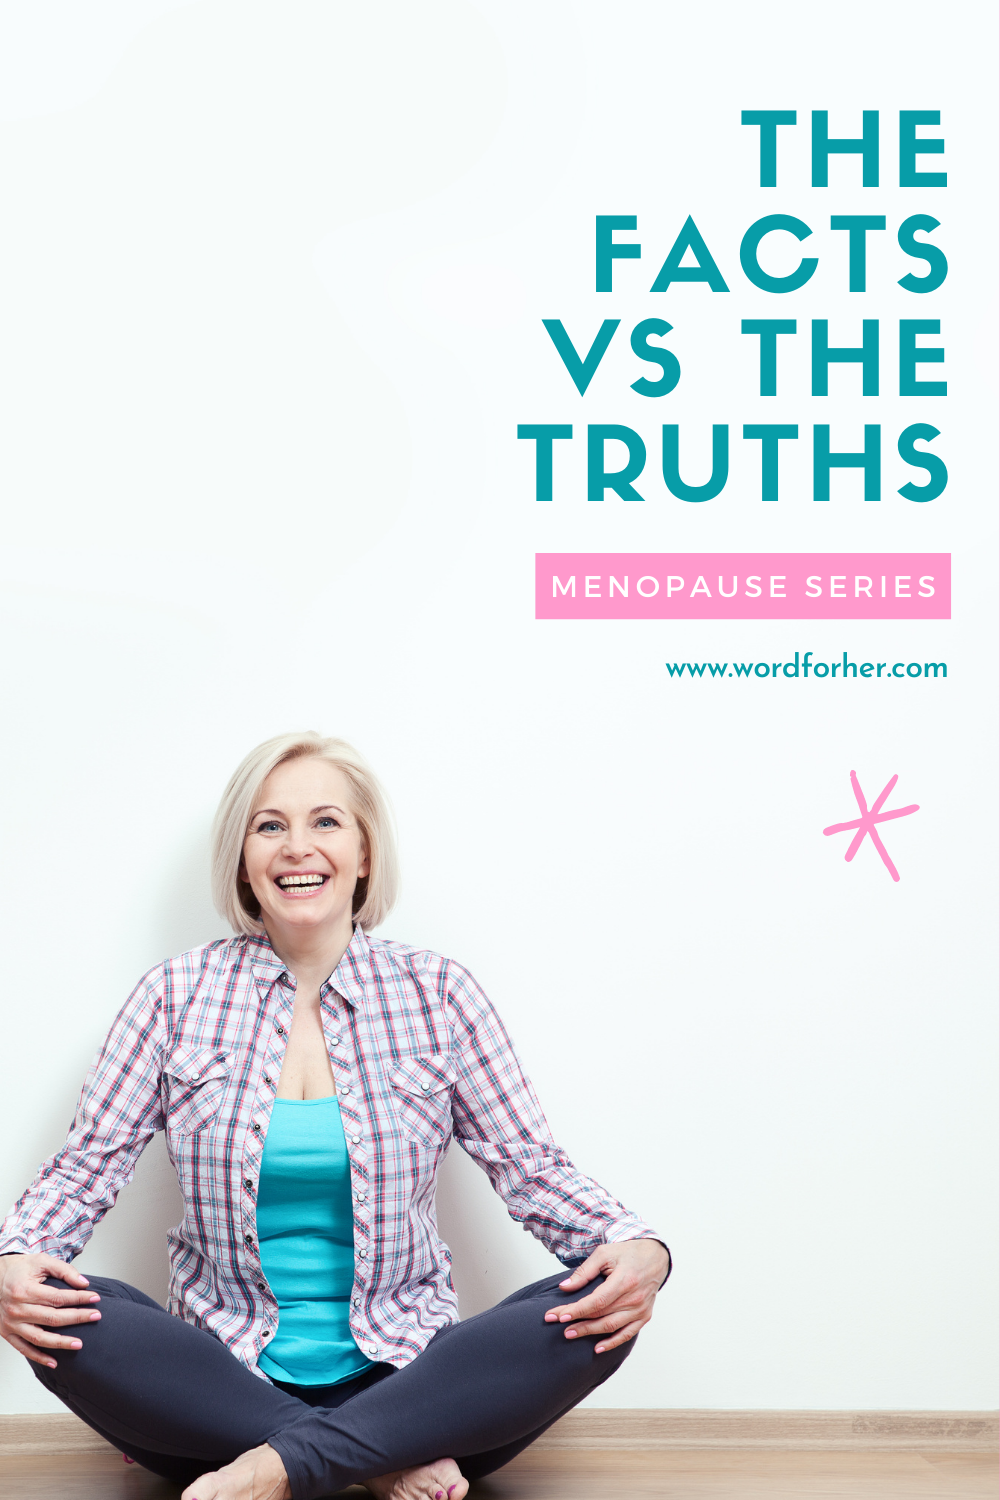 The facts of science on Menopause versus the truths from the word of God 